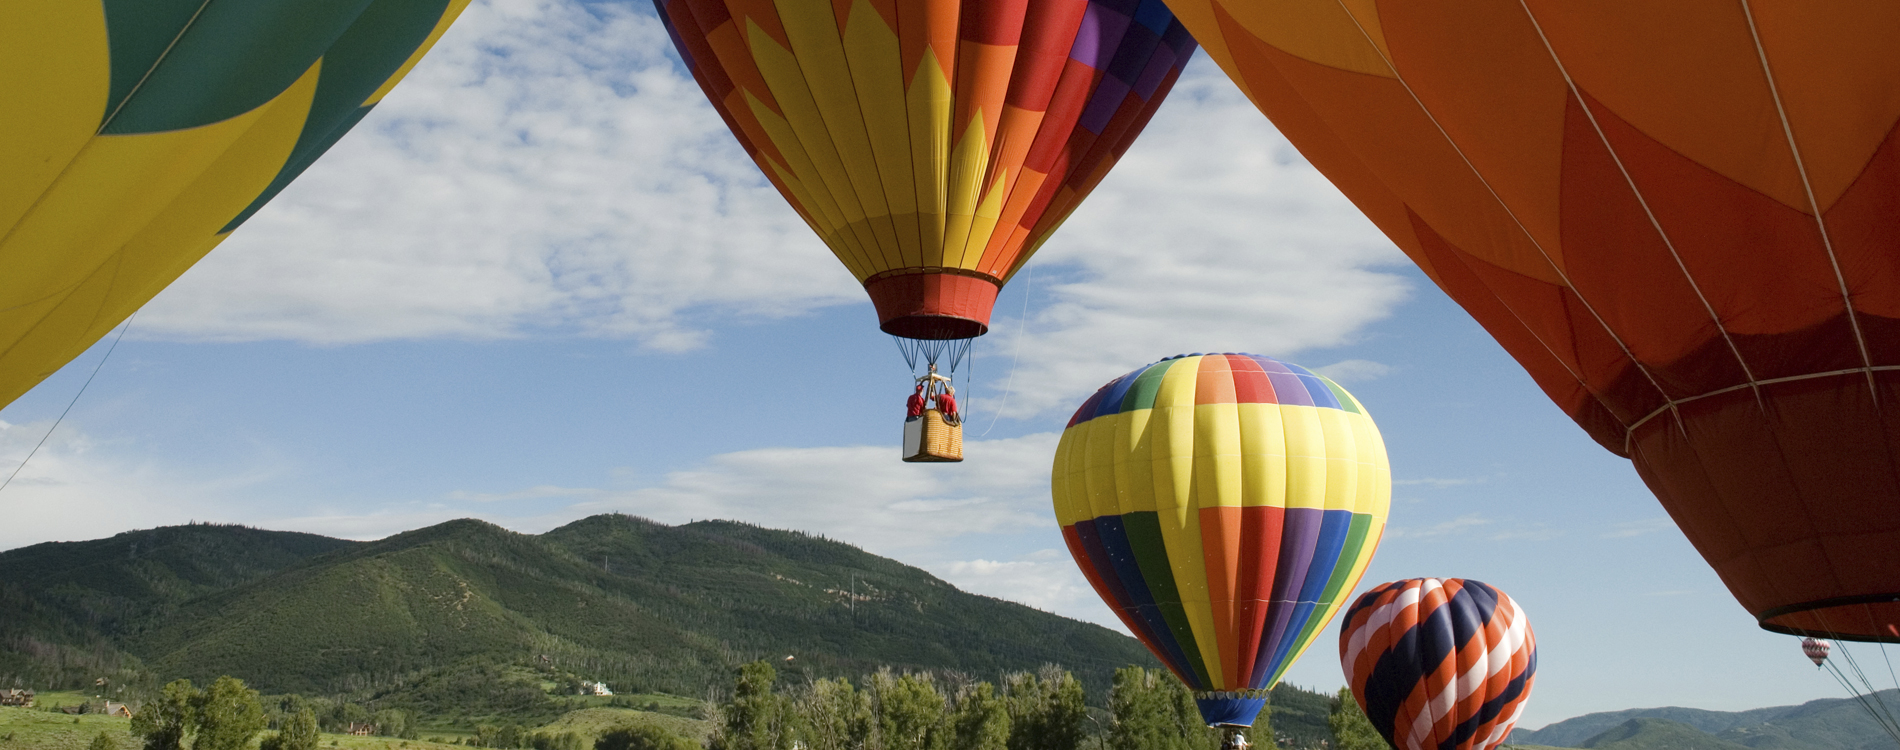 Steamboat Springs, CO - Balloons Over Steamboat Springs